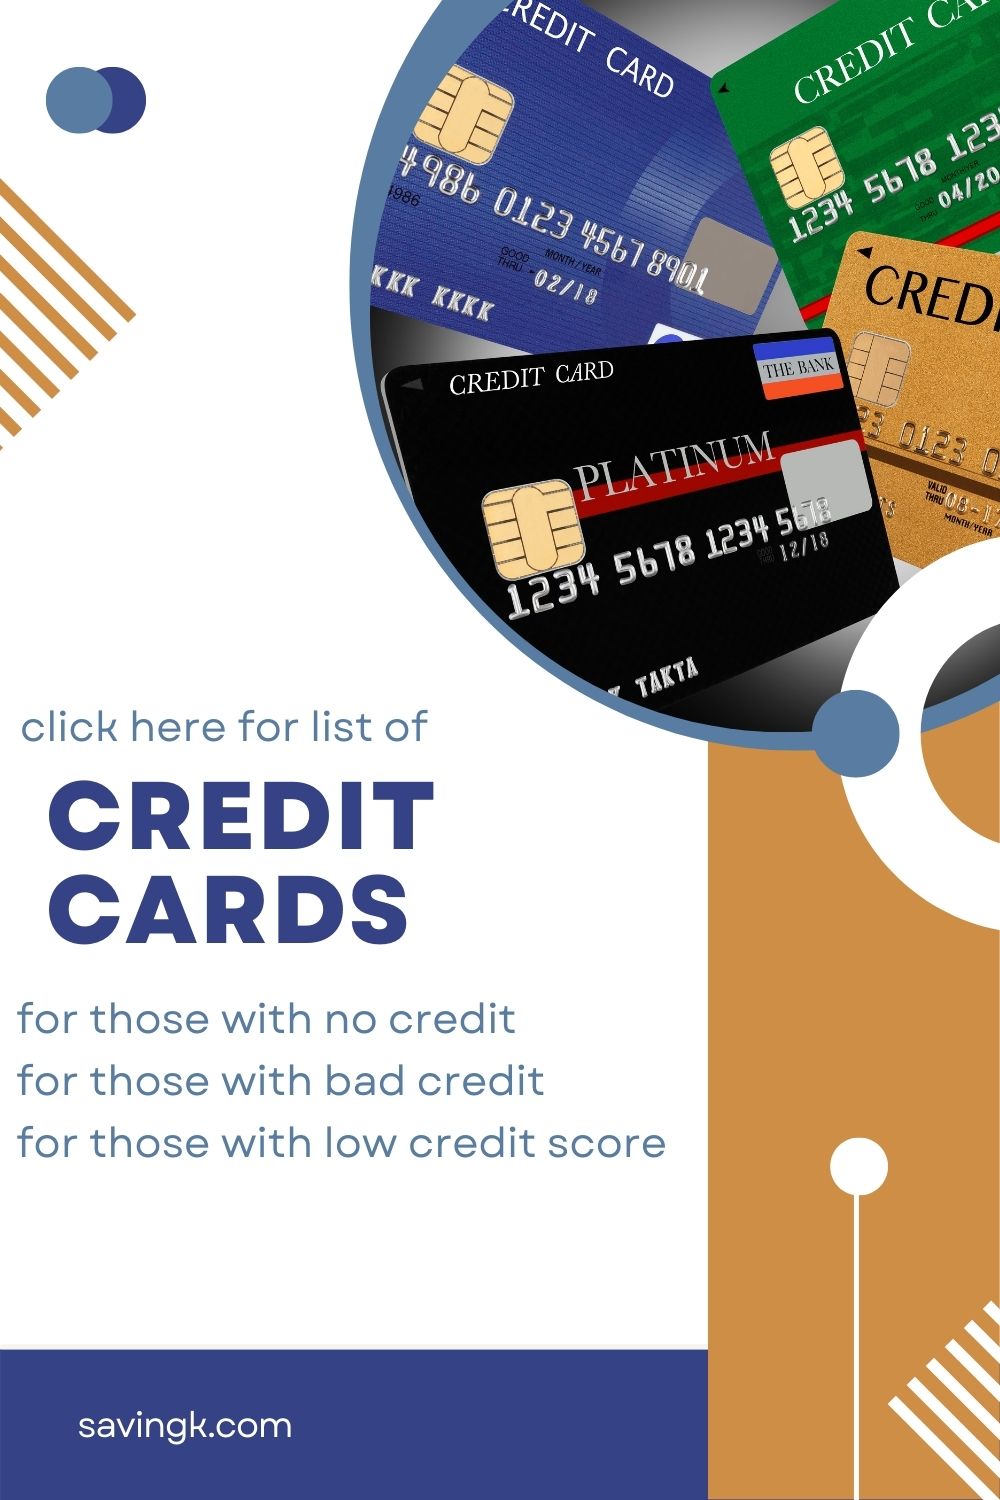 Credit Cards For Those With No/Bad Credit